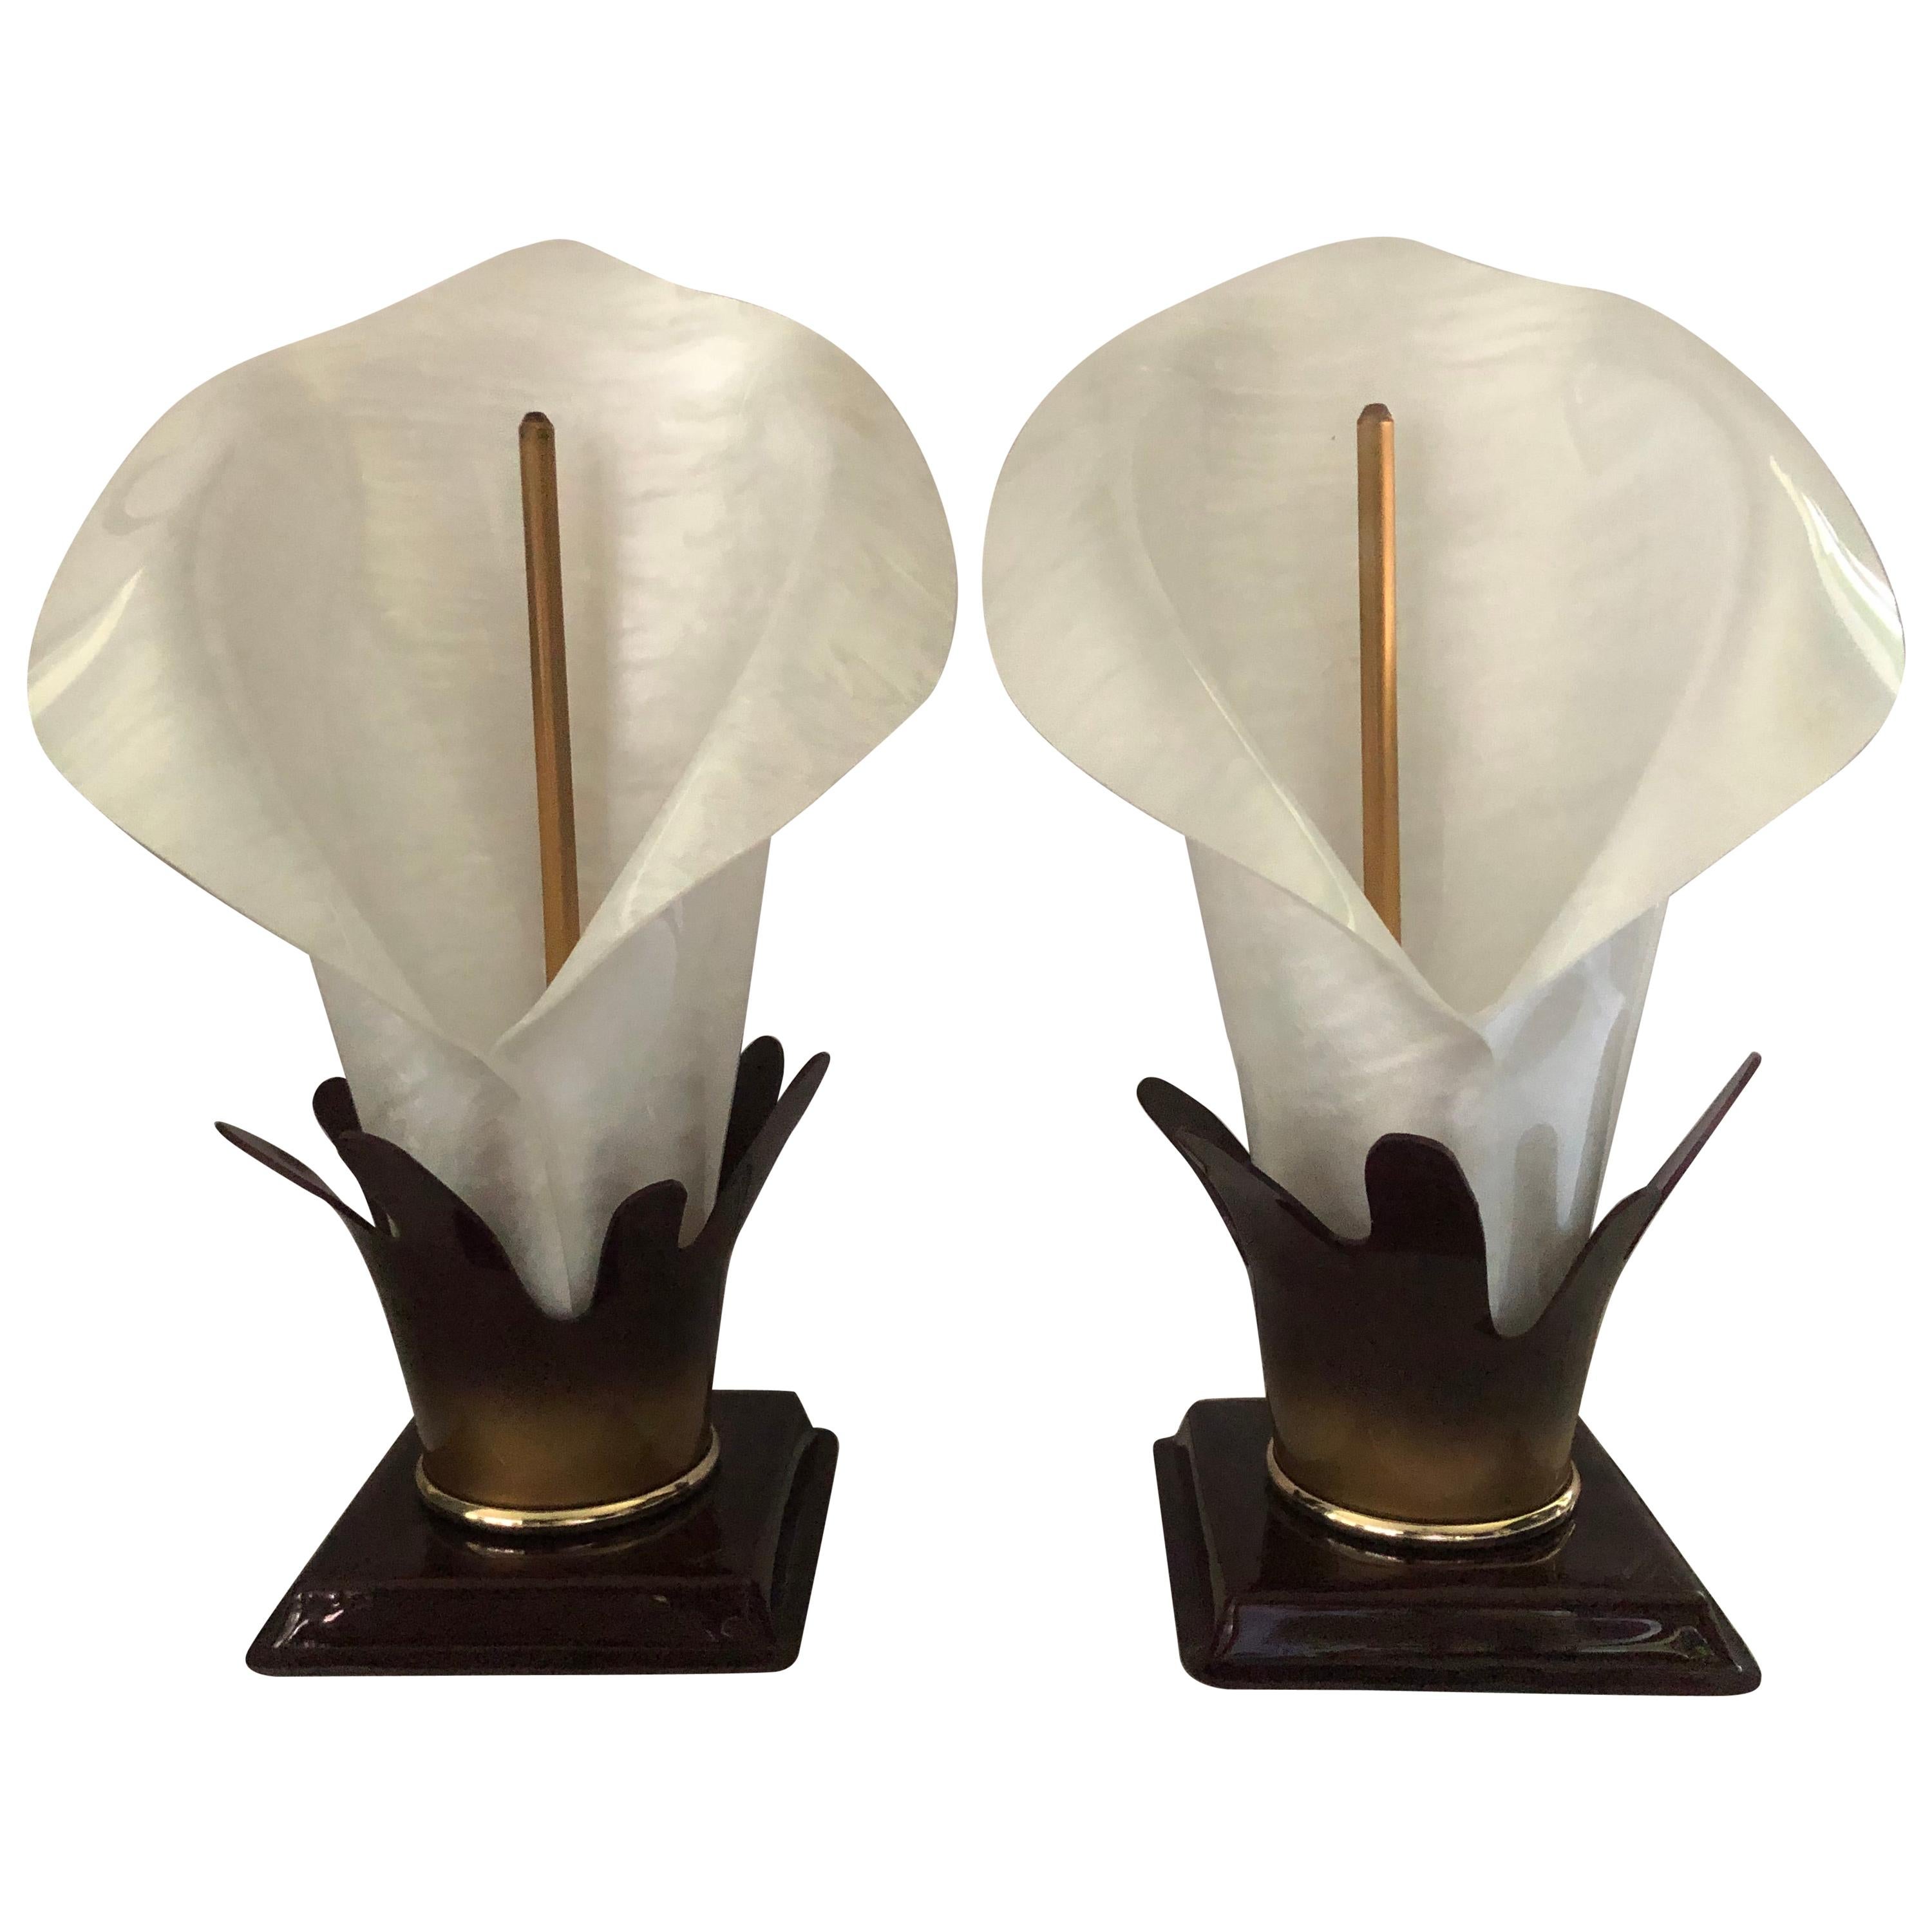 Beautiful Pair of Vintage Calla Lily Shaped Lamps by Armani